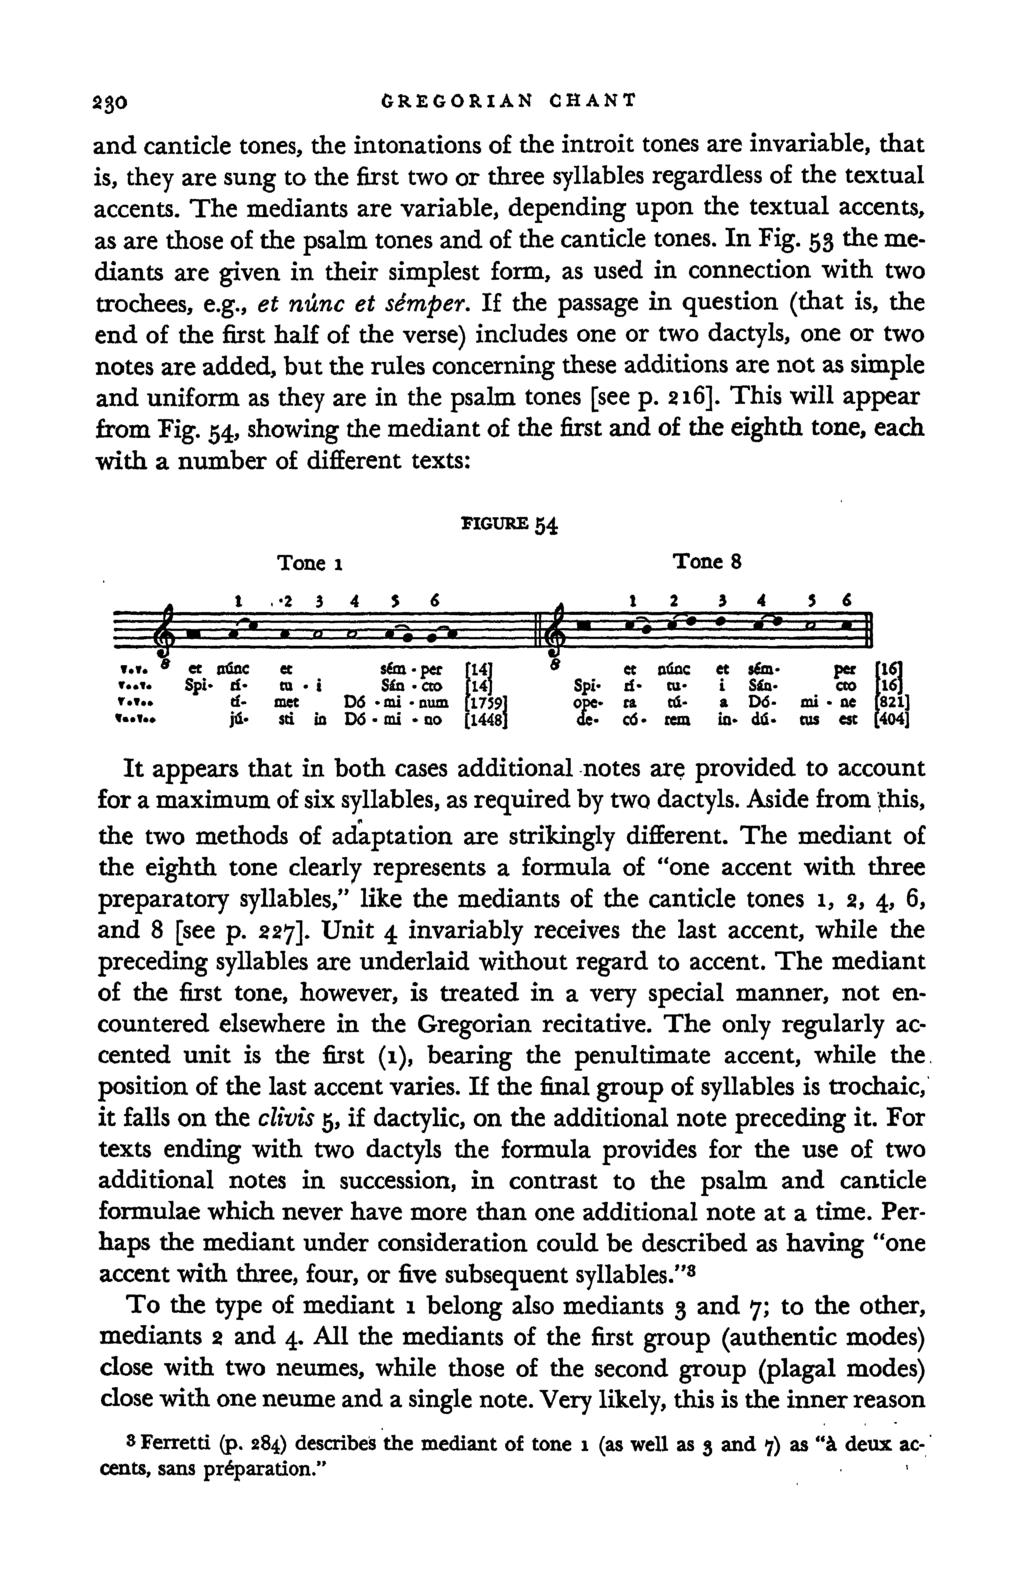 230 GREGORIAN CHANT and canticle tones, the intonations of the introit tones are invariable, that is, they are sung to the first two or three syllables regardless of the textual accents.